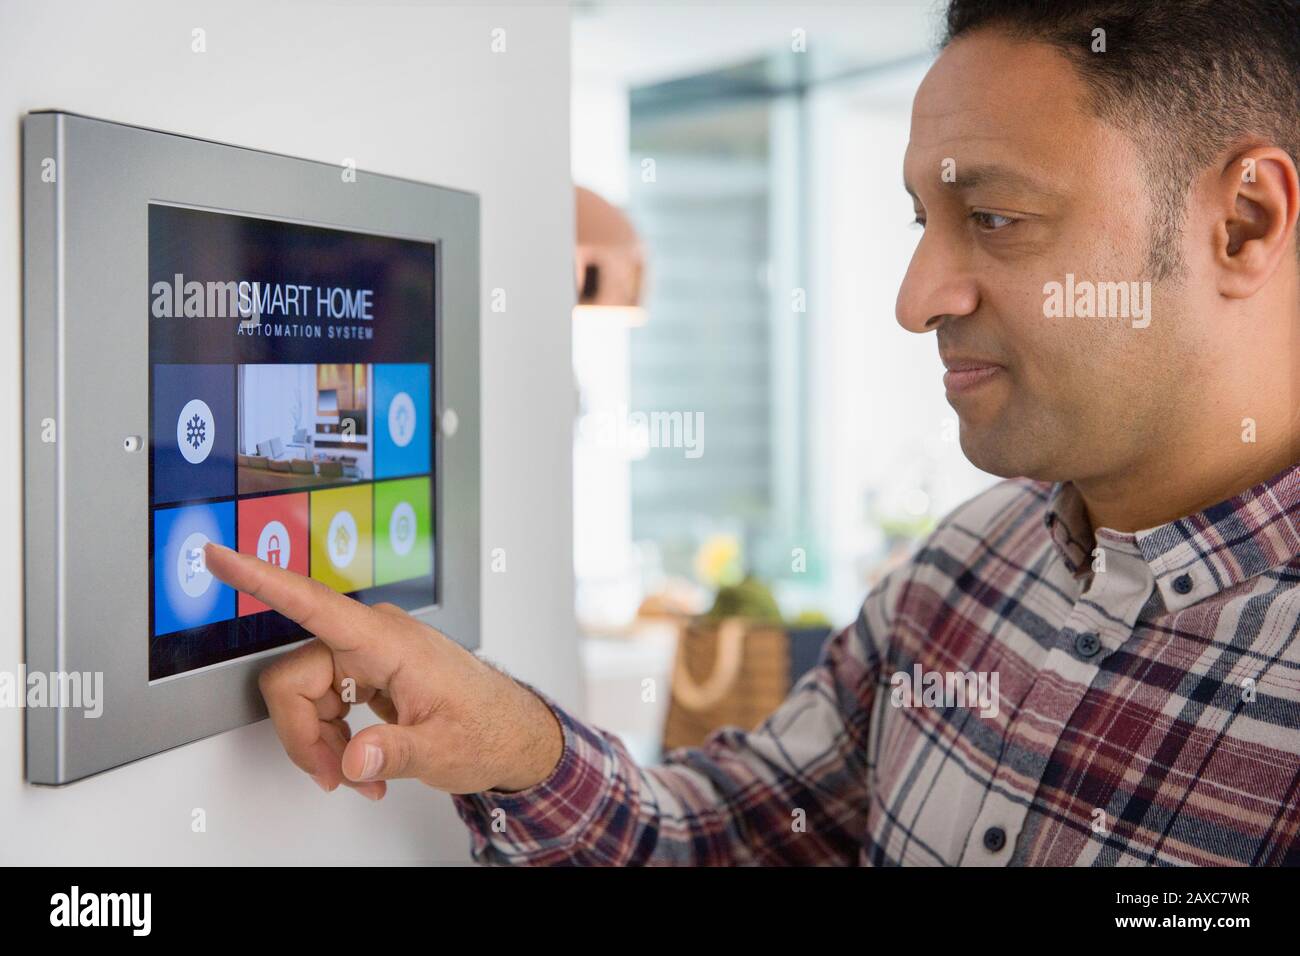 Man setting smart home navigation system alarm at touch screen Stock Photo